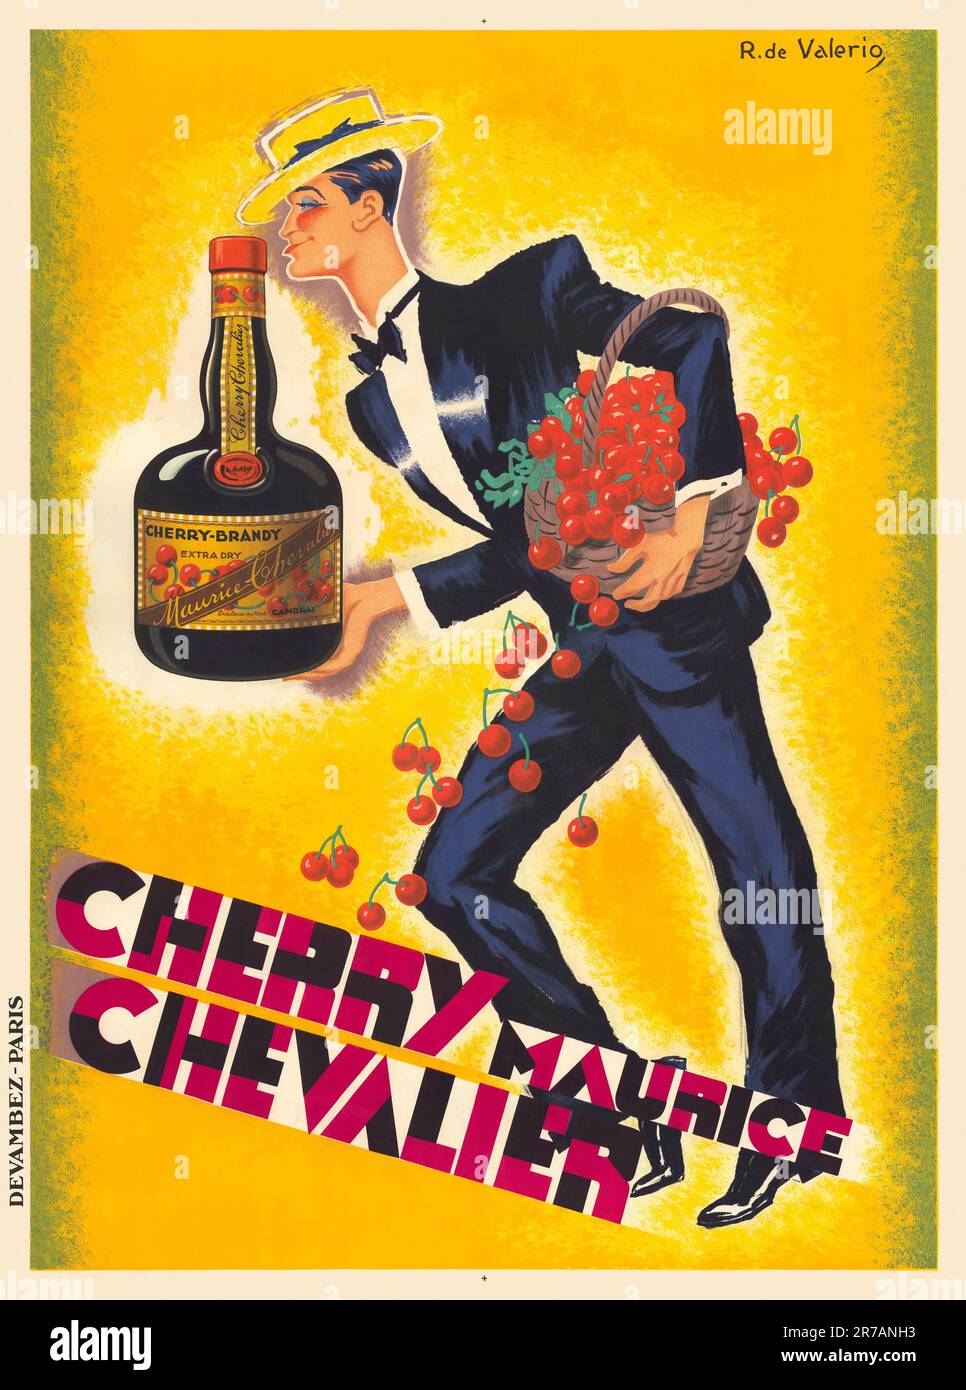 Cherry Maurice Chevalier by Roger de Valerio (1886-1951). Poster published in 1930 in France. Stock Photo